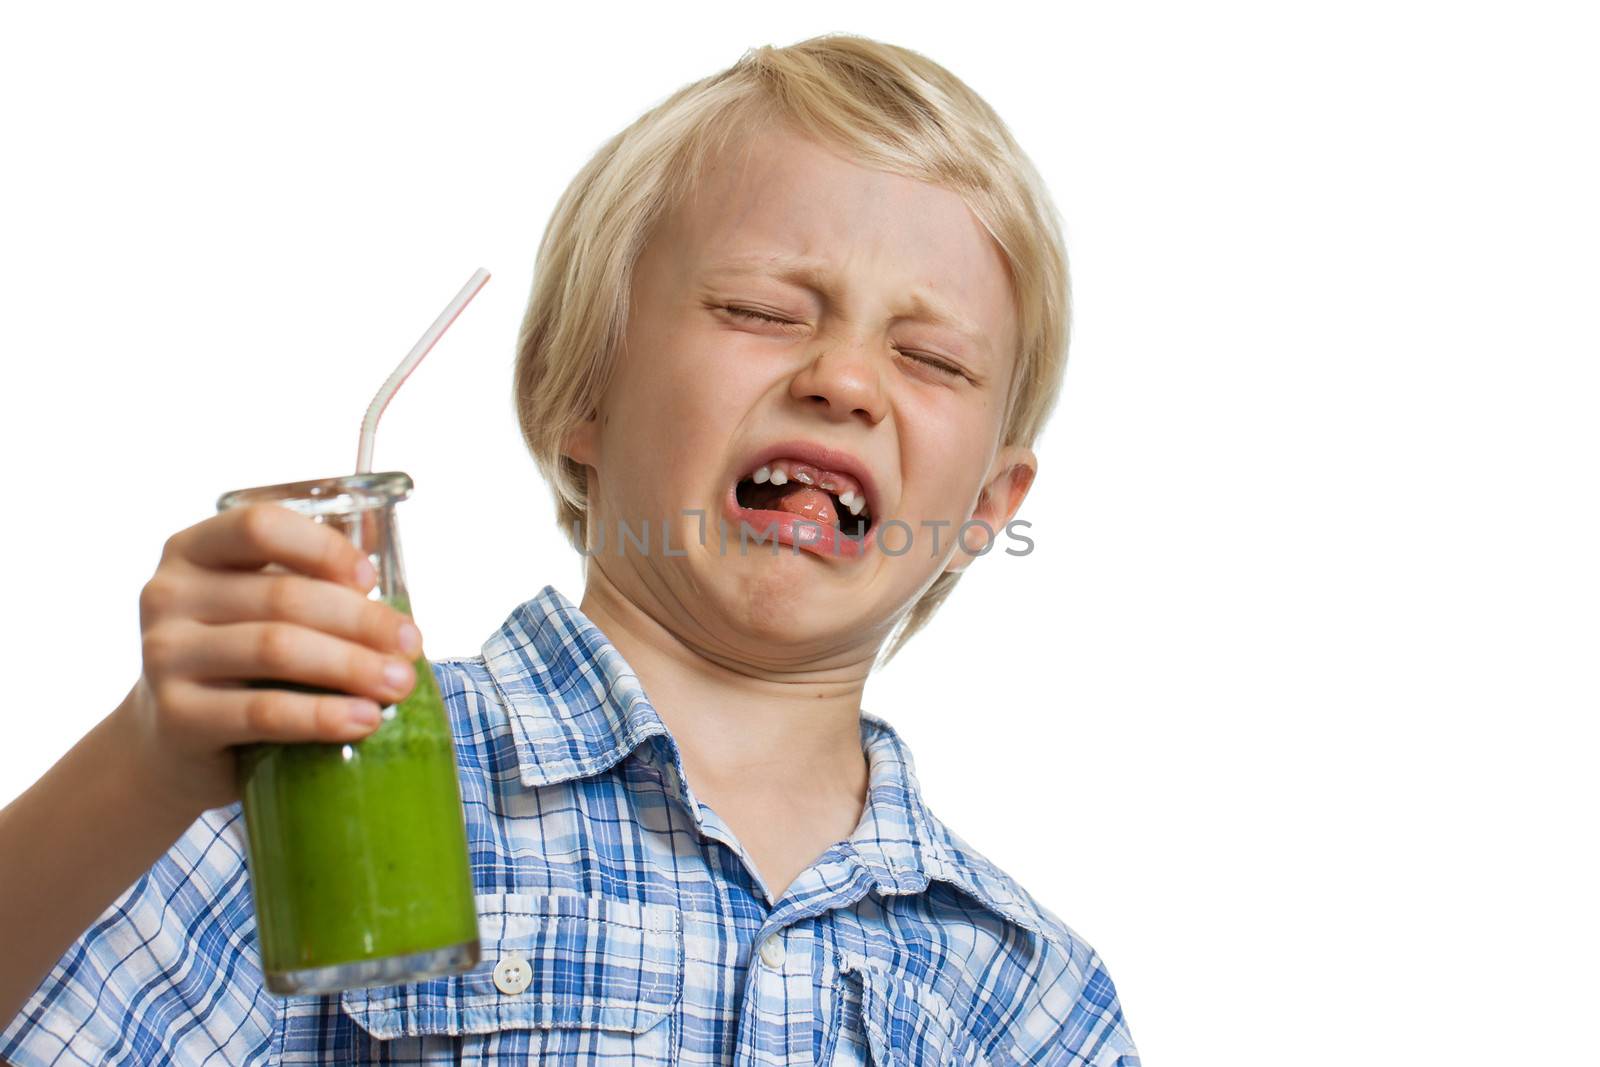 A young boy looking very disgusted holding a green smoothie. Isolated on white.